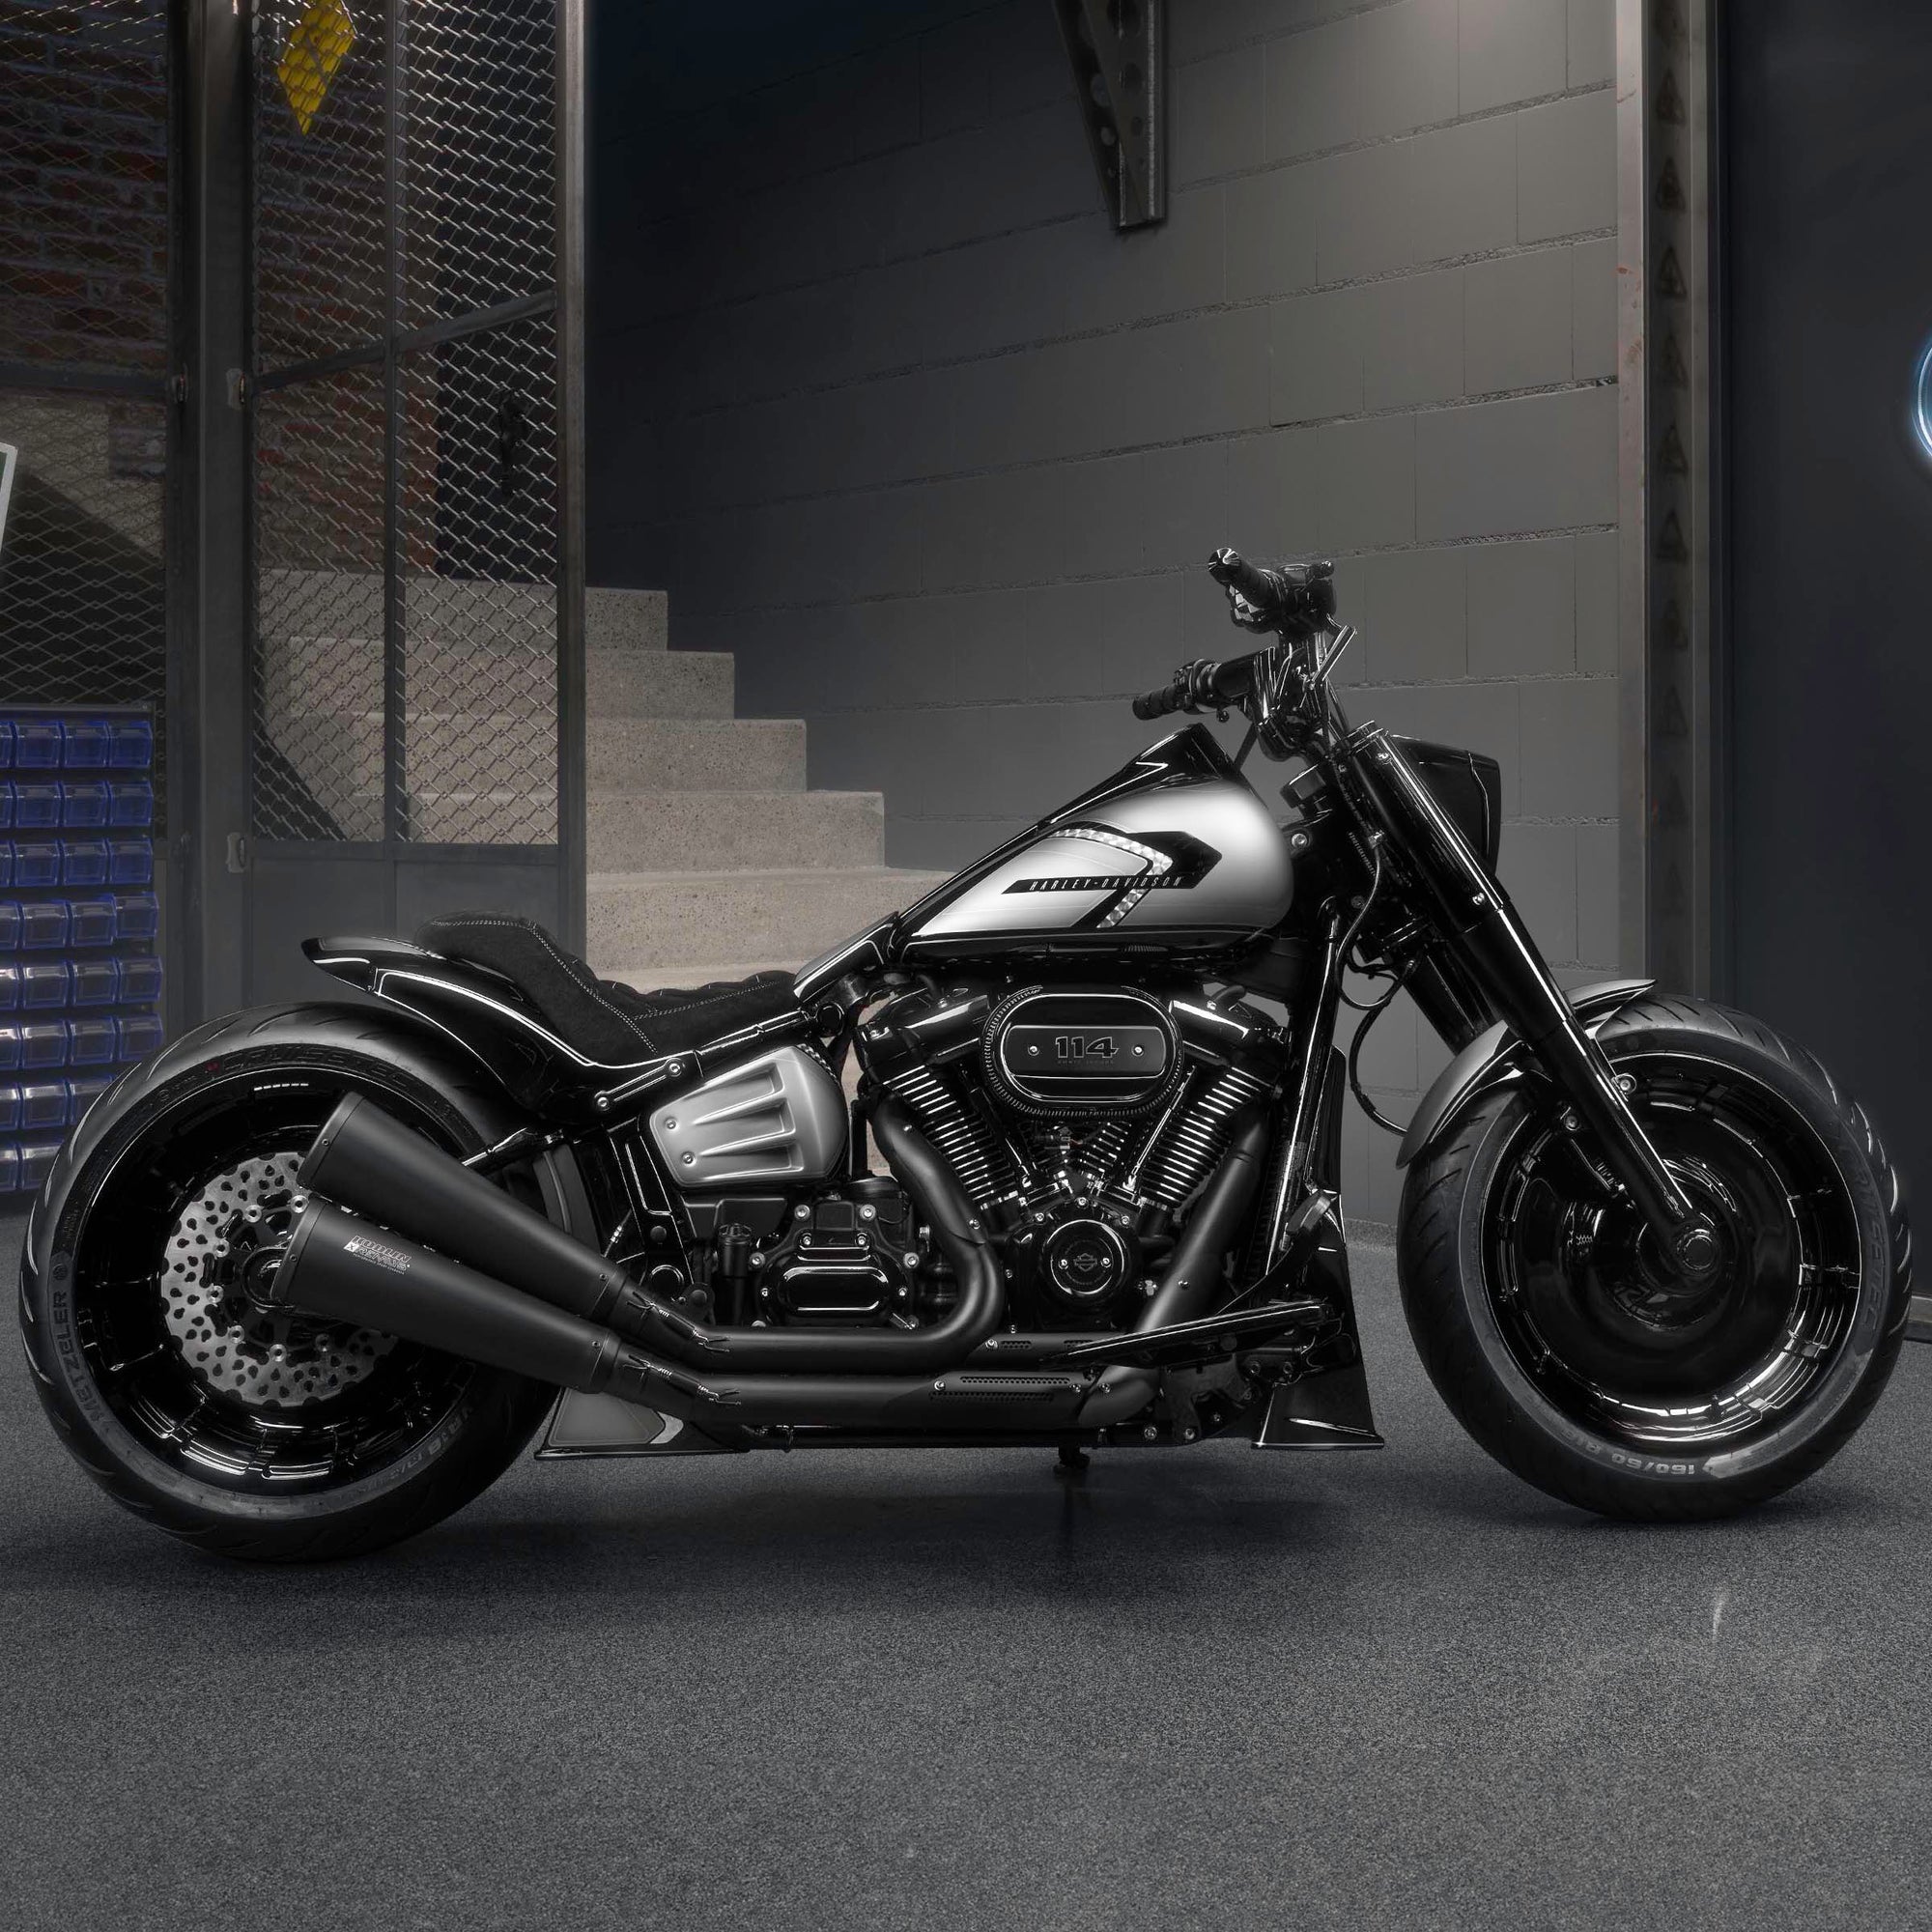 Modified Harley Davidson Softail Fat Boy motorcycle with Killer Custom parts from the side in a modern bike shop